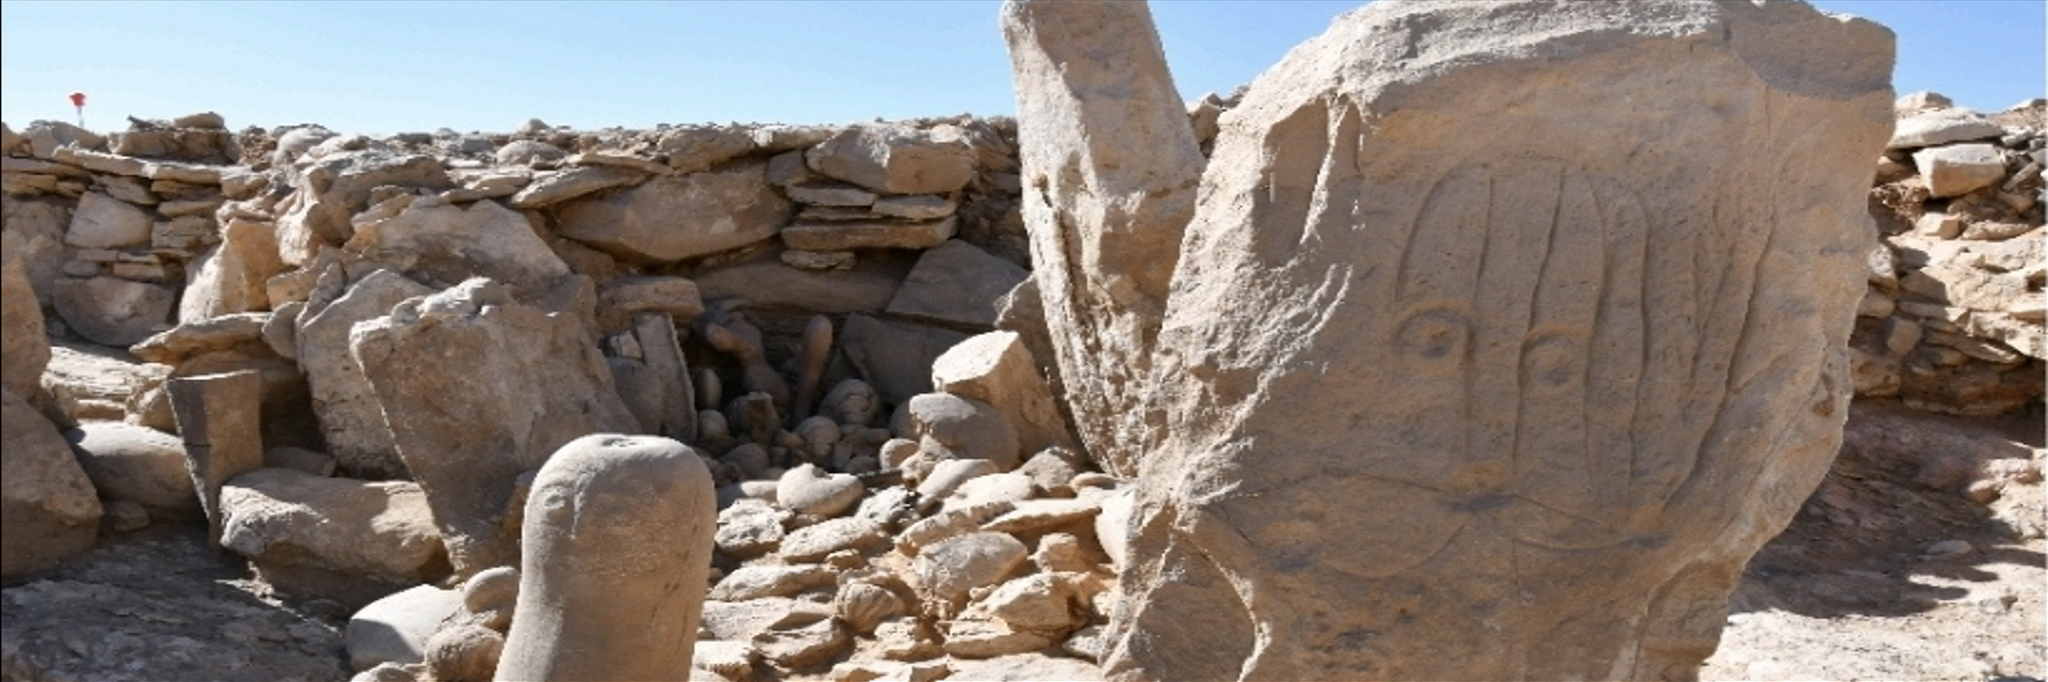 View of the discovered ritual installation in Jordan